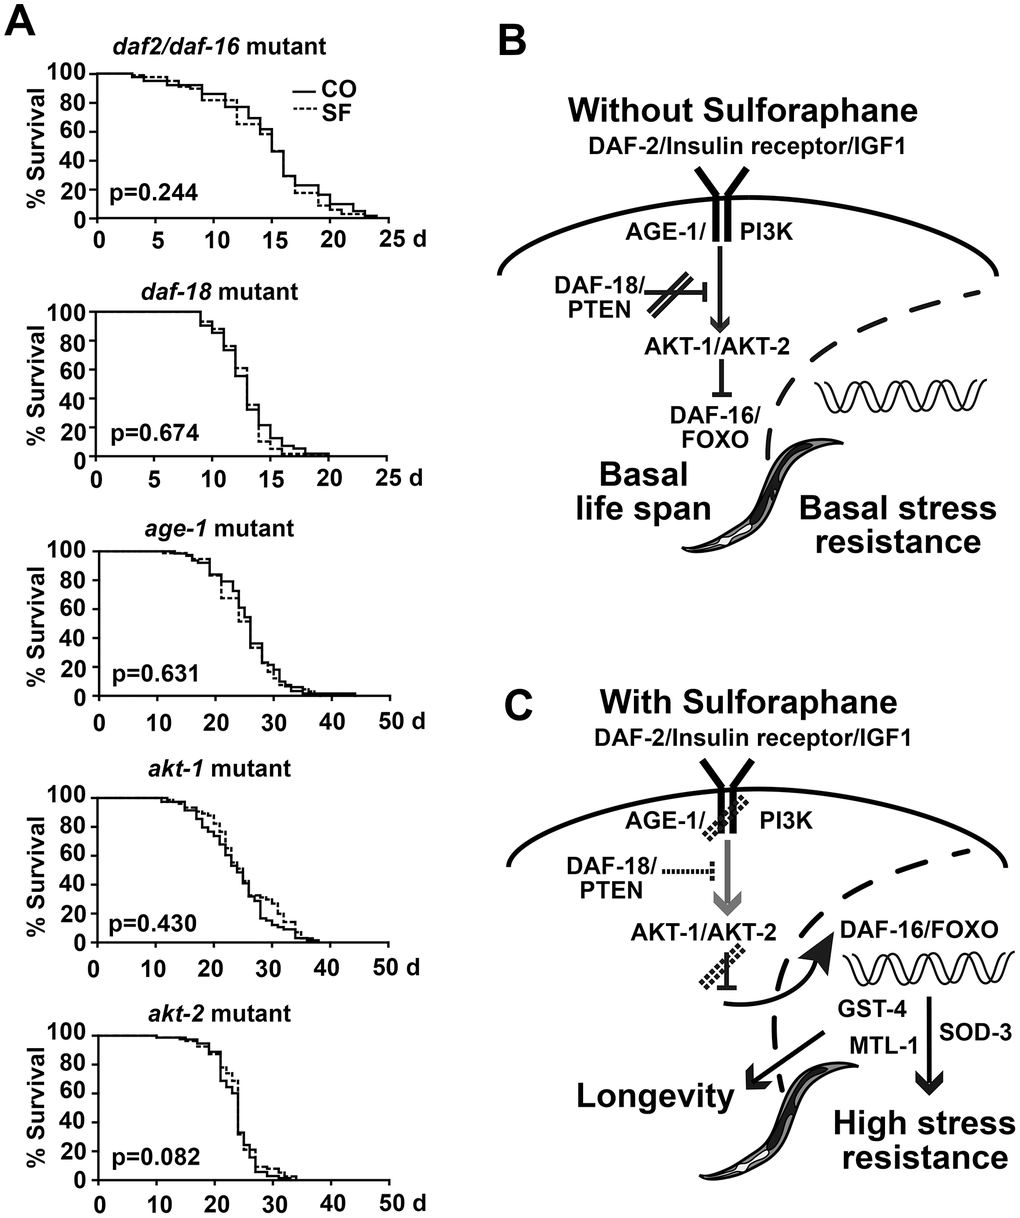 Sulforaphane mediates longevity via DAF-2/DAF-16 signaling. (A) Kaplan-Meier survival curves were generated by the use of C. elegans strains with mutations in daf-2/daf-16, daf-18, age-1, akt-1 and akt-2, and the P values, indicating significance or not, are given within the diagrams. (B, C) Schematic representation of DAF-2/DAF-16 signaling under physiological conditions and after treatment with sulforaphane, as described in detail in the results section.